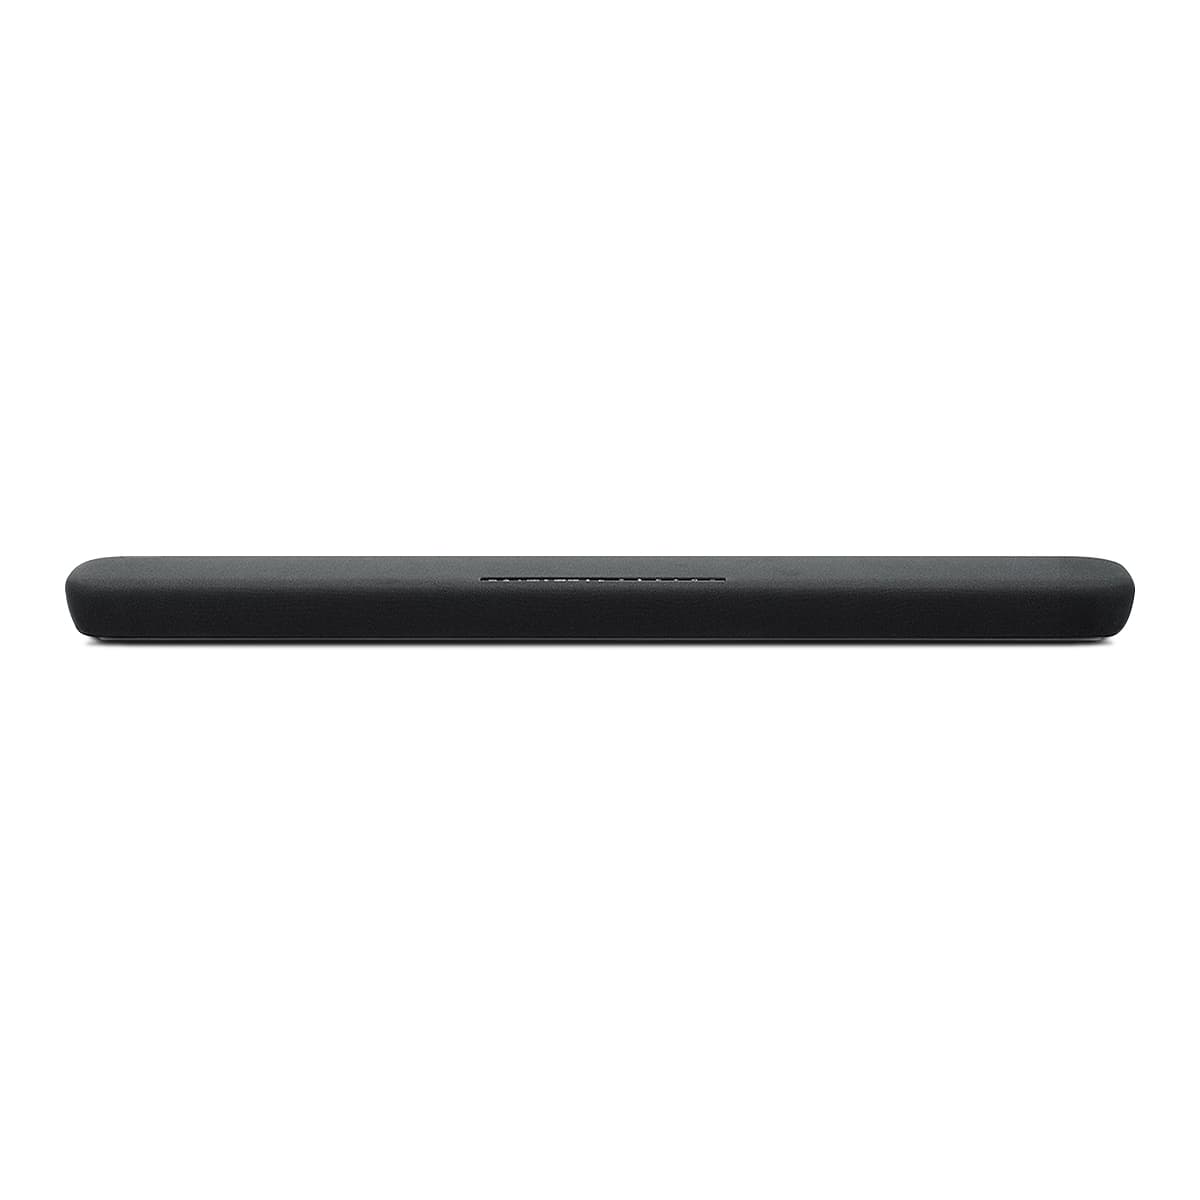 Yamaha Yas-109 Sound Bar with Built-in Subwoofers, Bluetooth - image 1 of 10